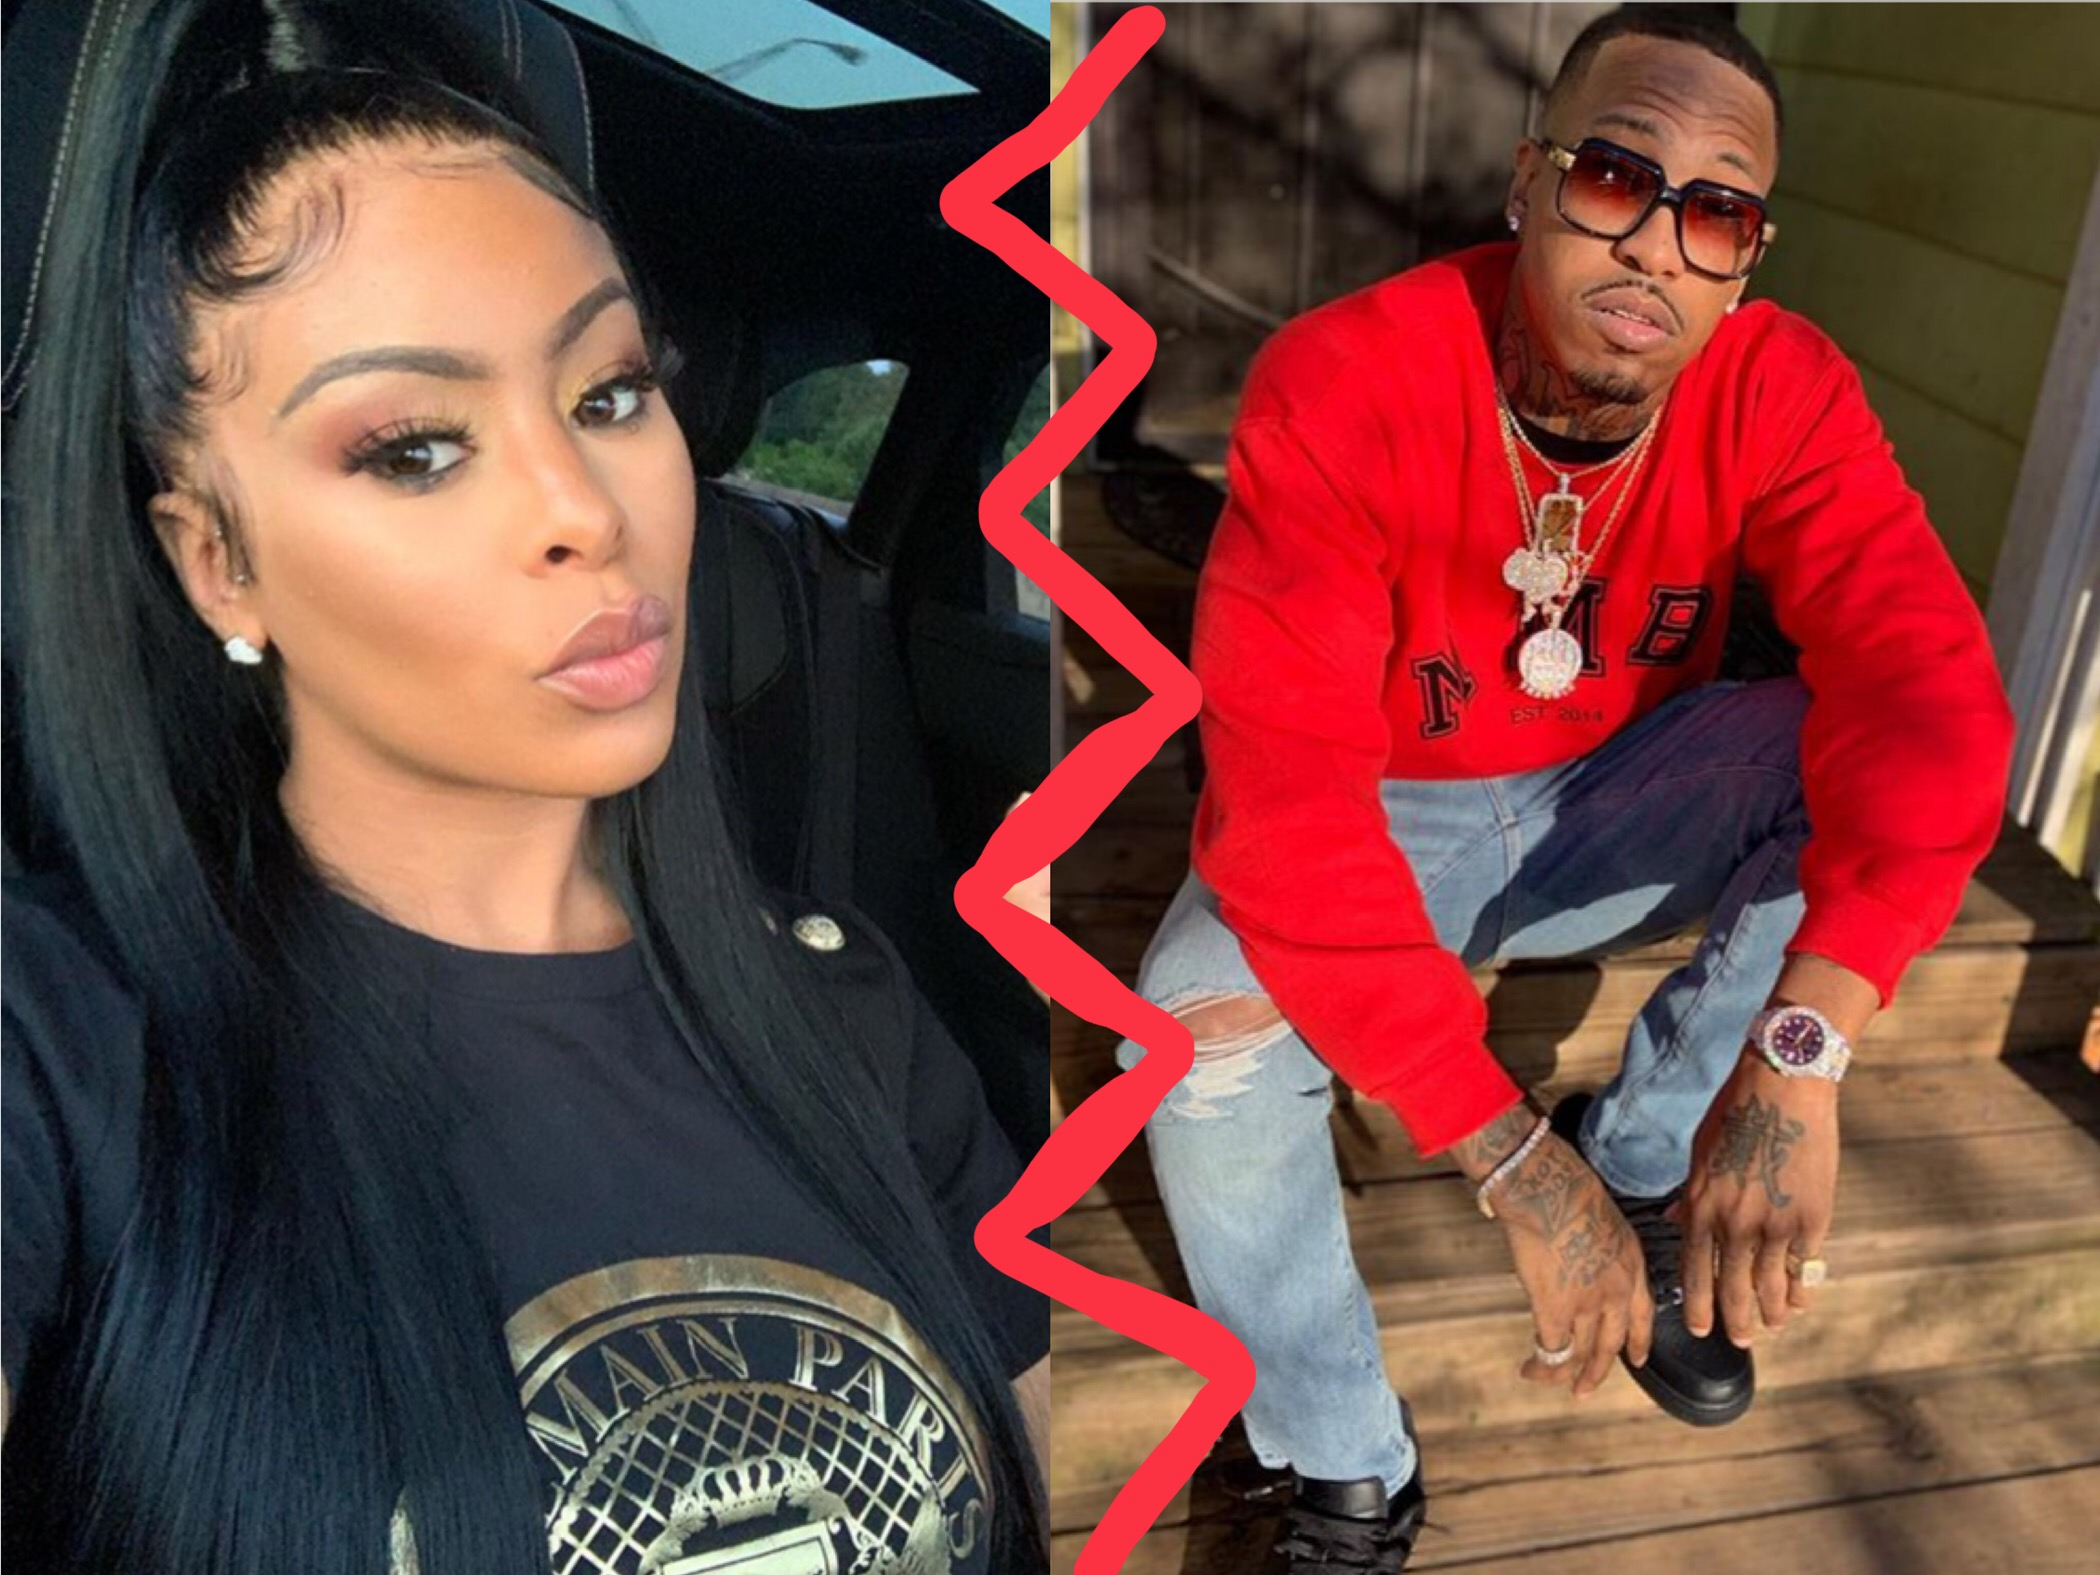 Alexis Skyy and Trouble got into it over social media concerning their rela...